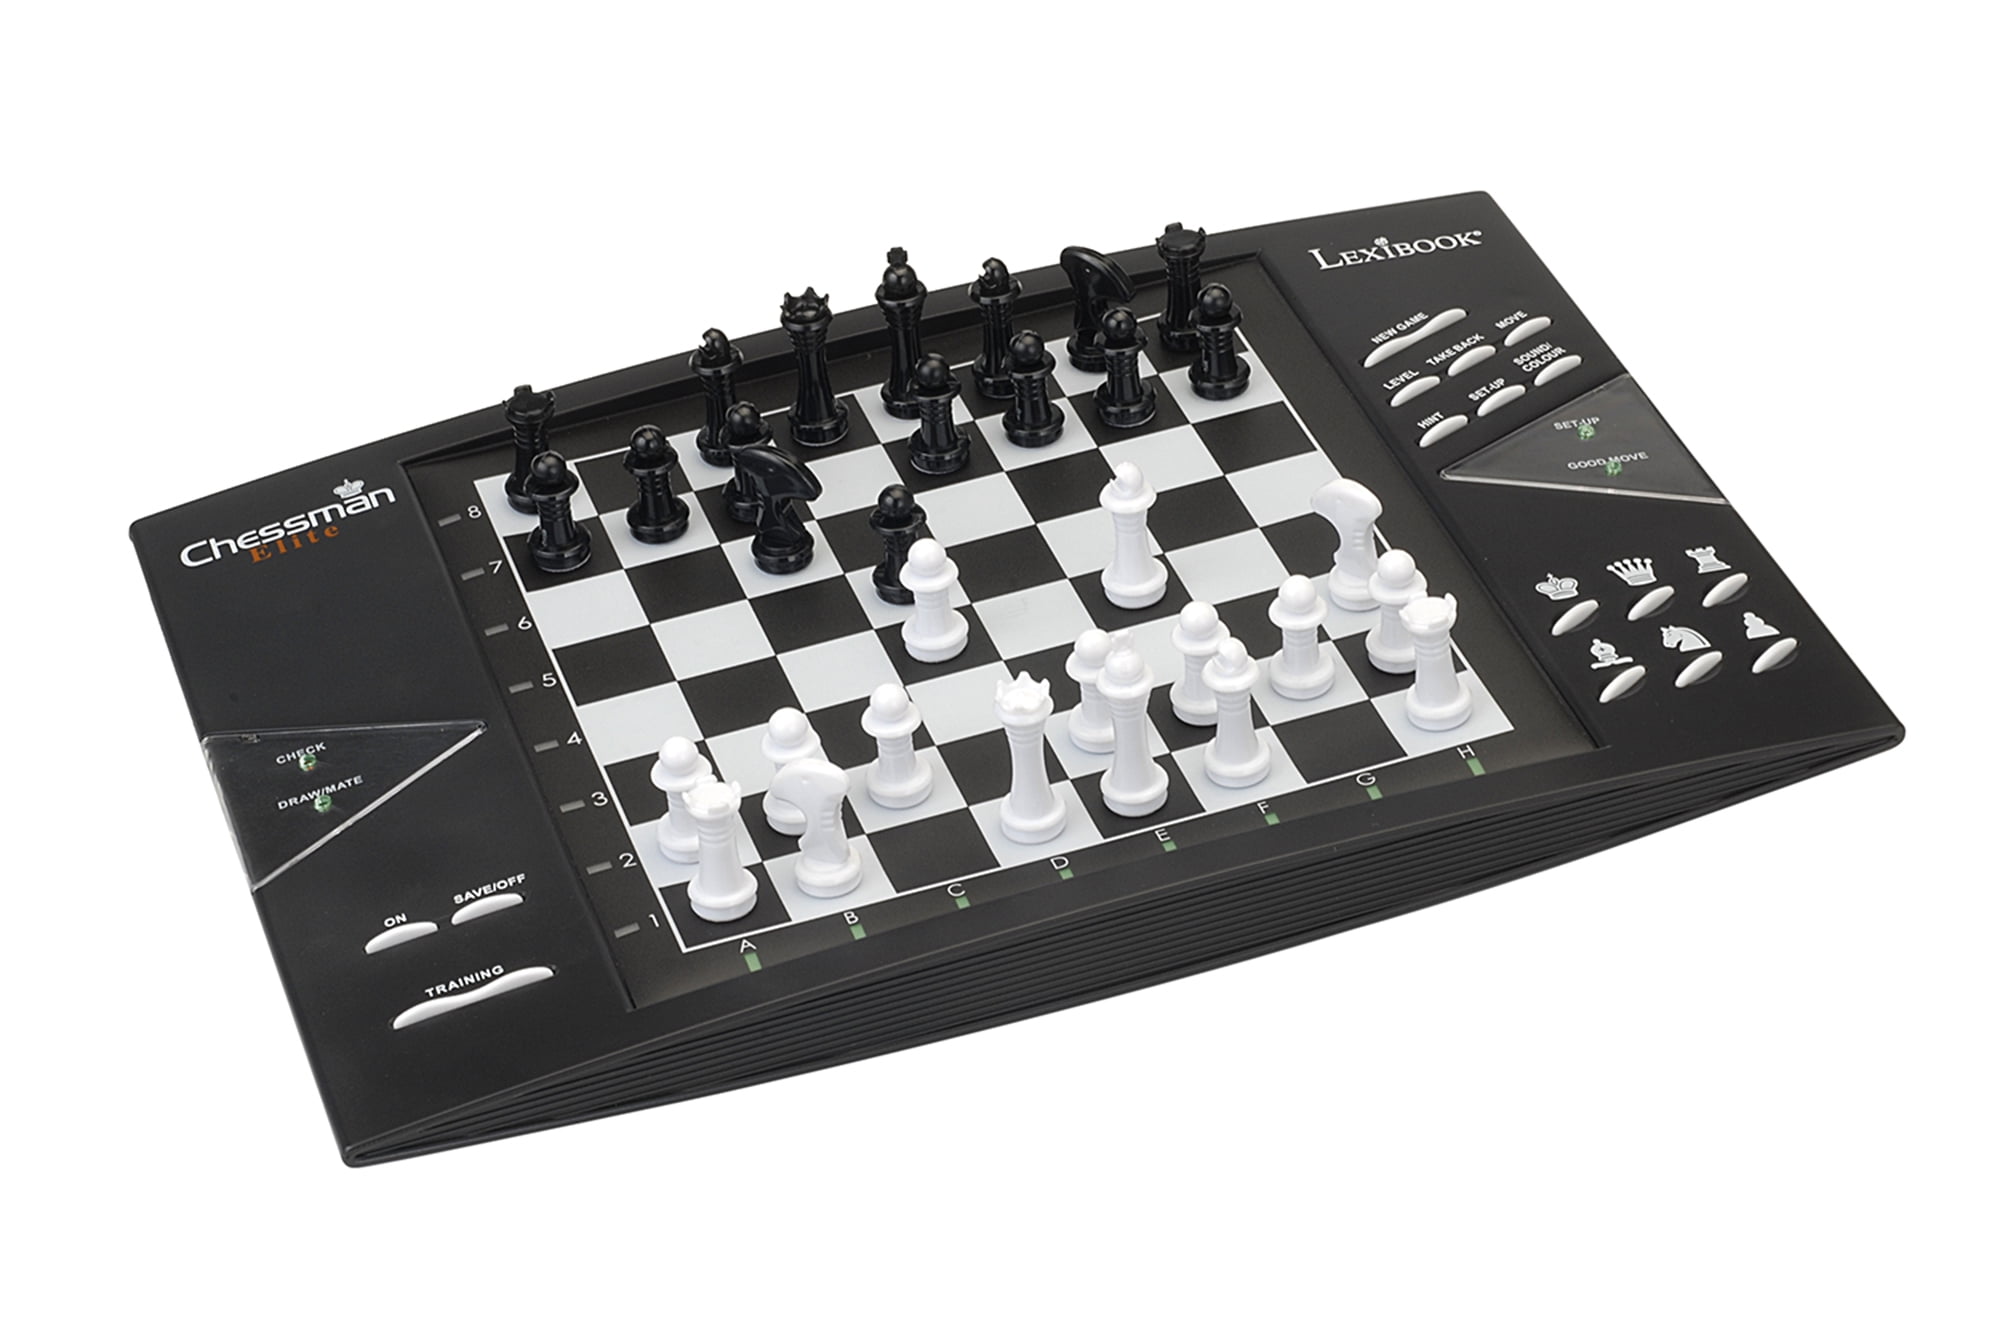 Electronic Chess with Exercise & Talking Tutor Functions Checkers & Chess Set Pieces Included Best Electronic Chess for Kids! 8 in 1 Games